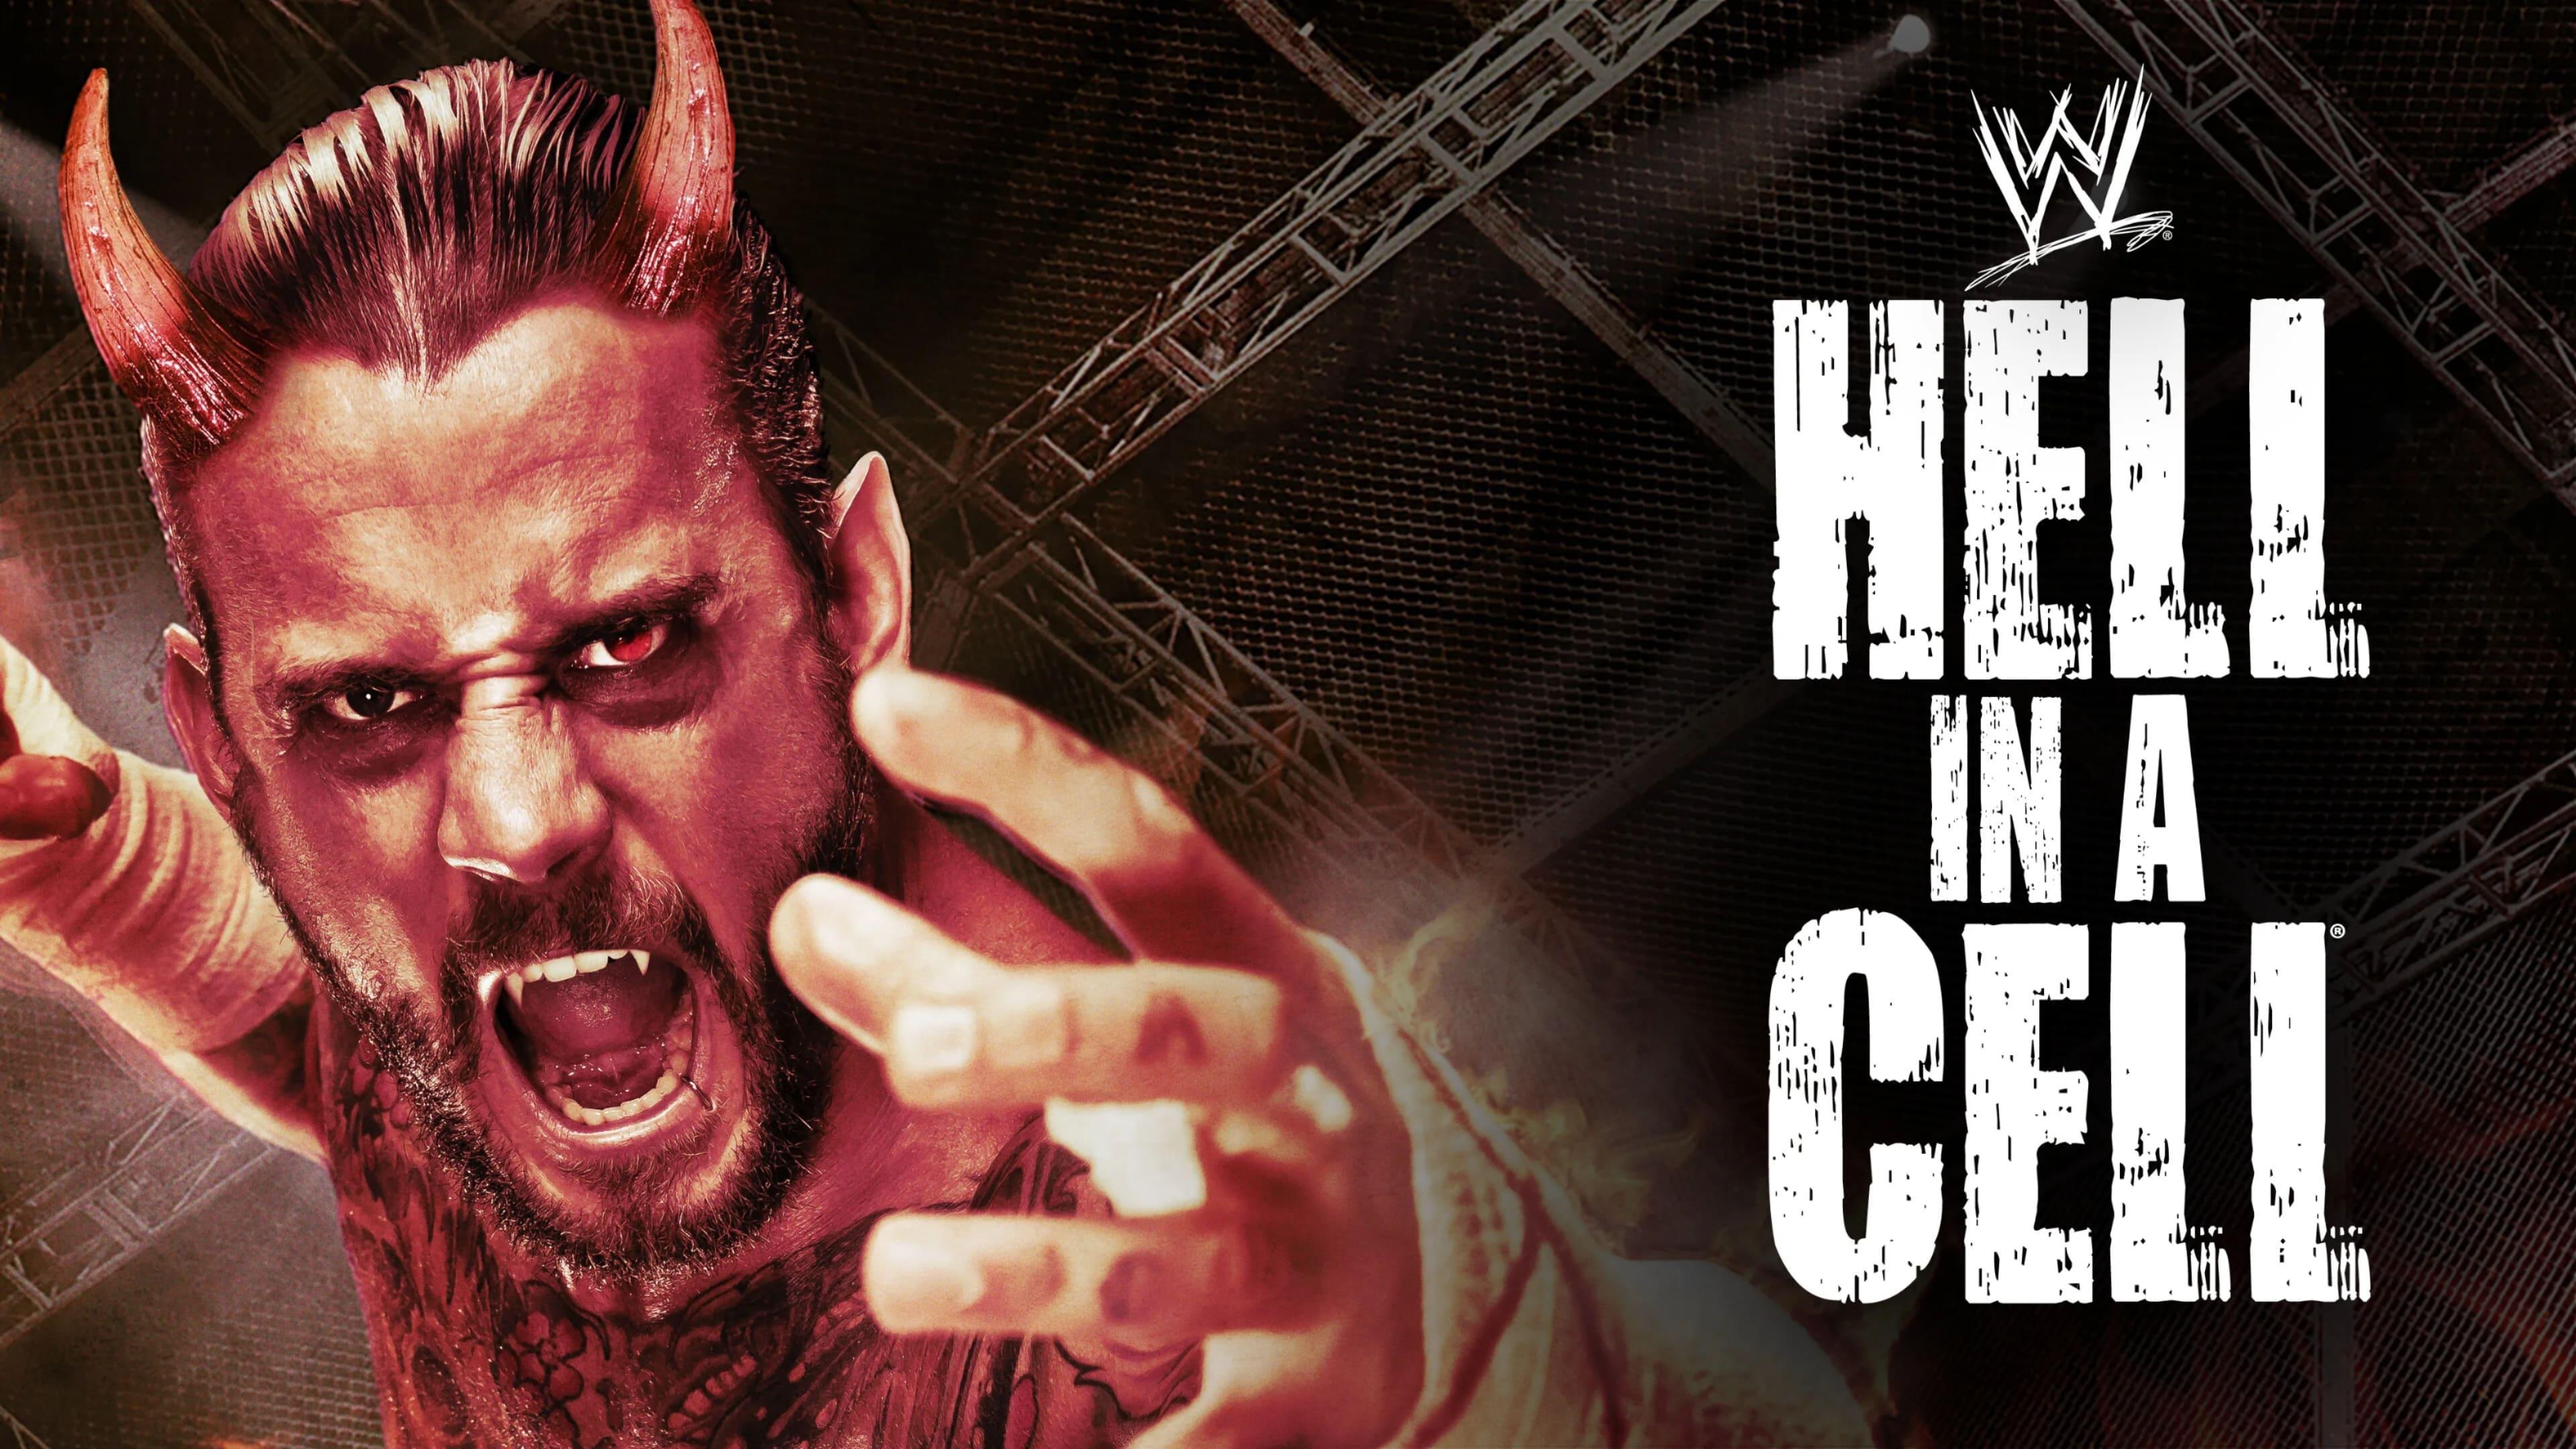 WWE Hell In A Cell 2012 backdrop